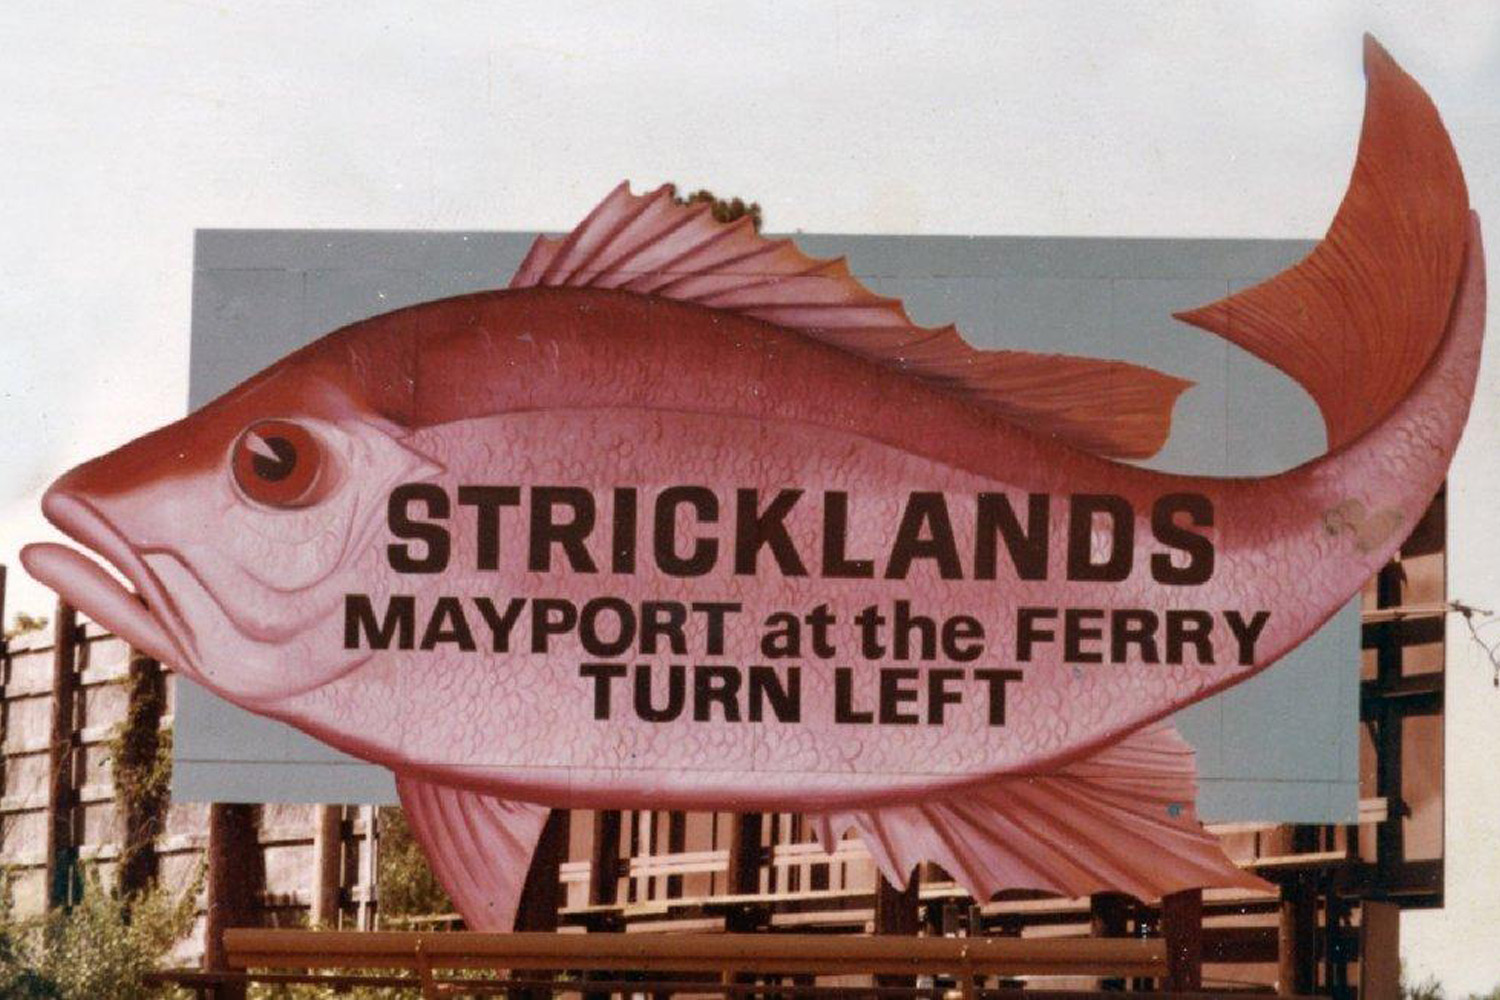 Historical Billboard featuring a large fish that references Well-known Strickland's Restaurant and the Ferry.